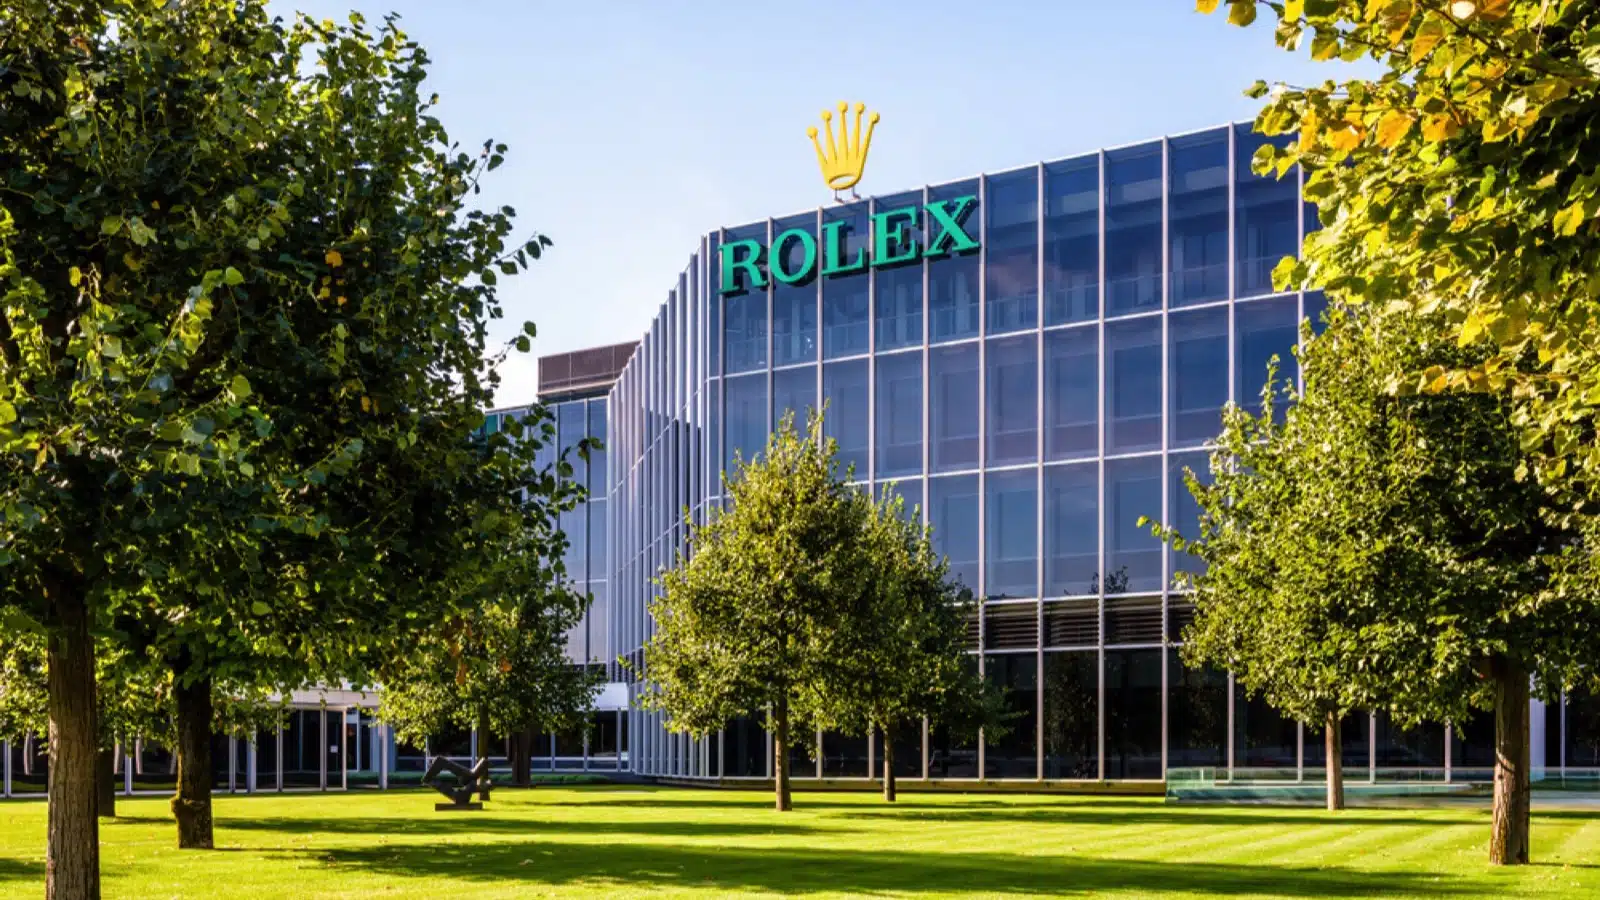 Geneva, Switzerland - September 10, 2020: Glass facade of the headquarters of Rolex, the swiss brand of luxury watches, on a sunny summer morning.